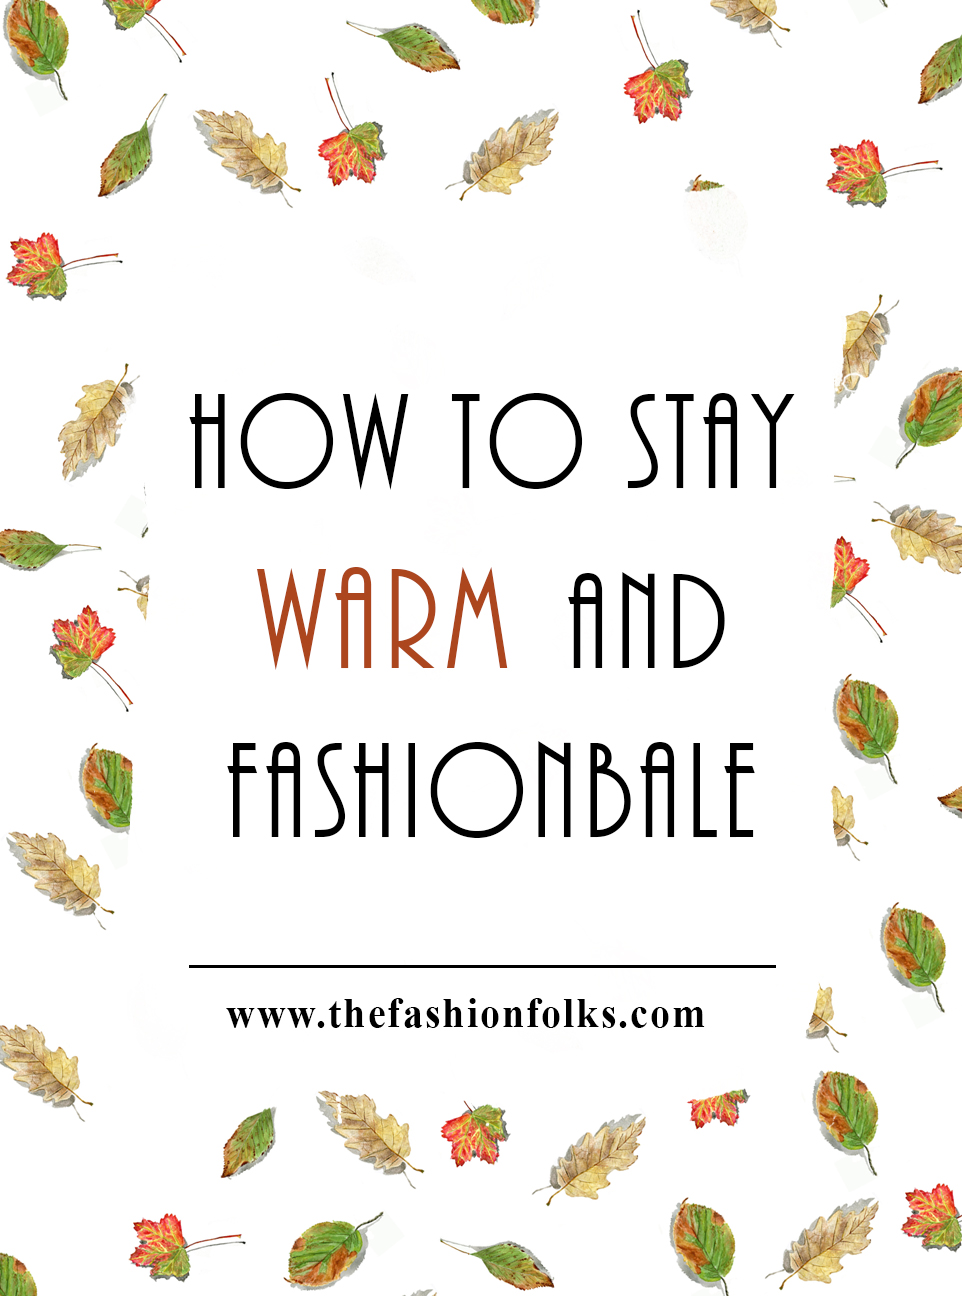 How To Stay Warm And Fashionable For Fall and Winter. Here's how to dress warm and look chic when it's cold outside! | The Fashion Folks